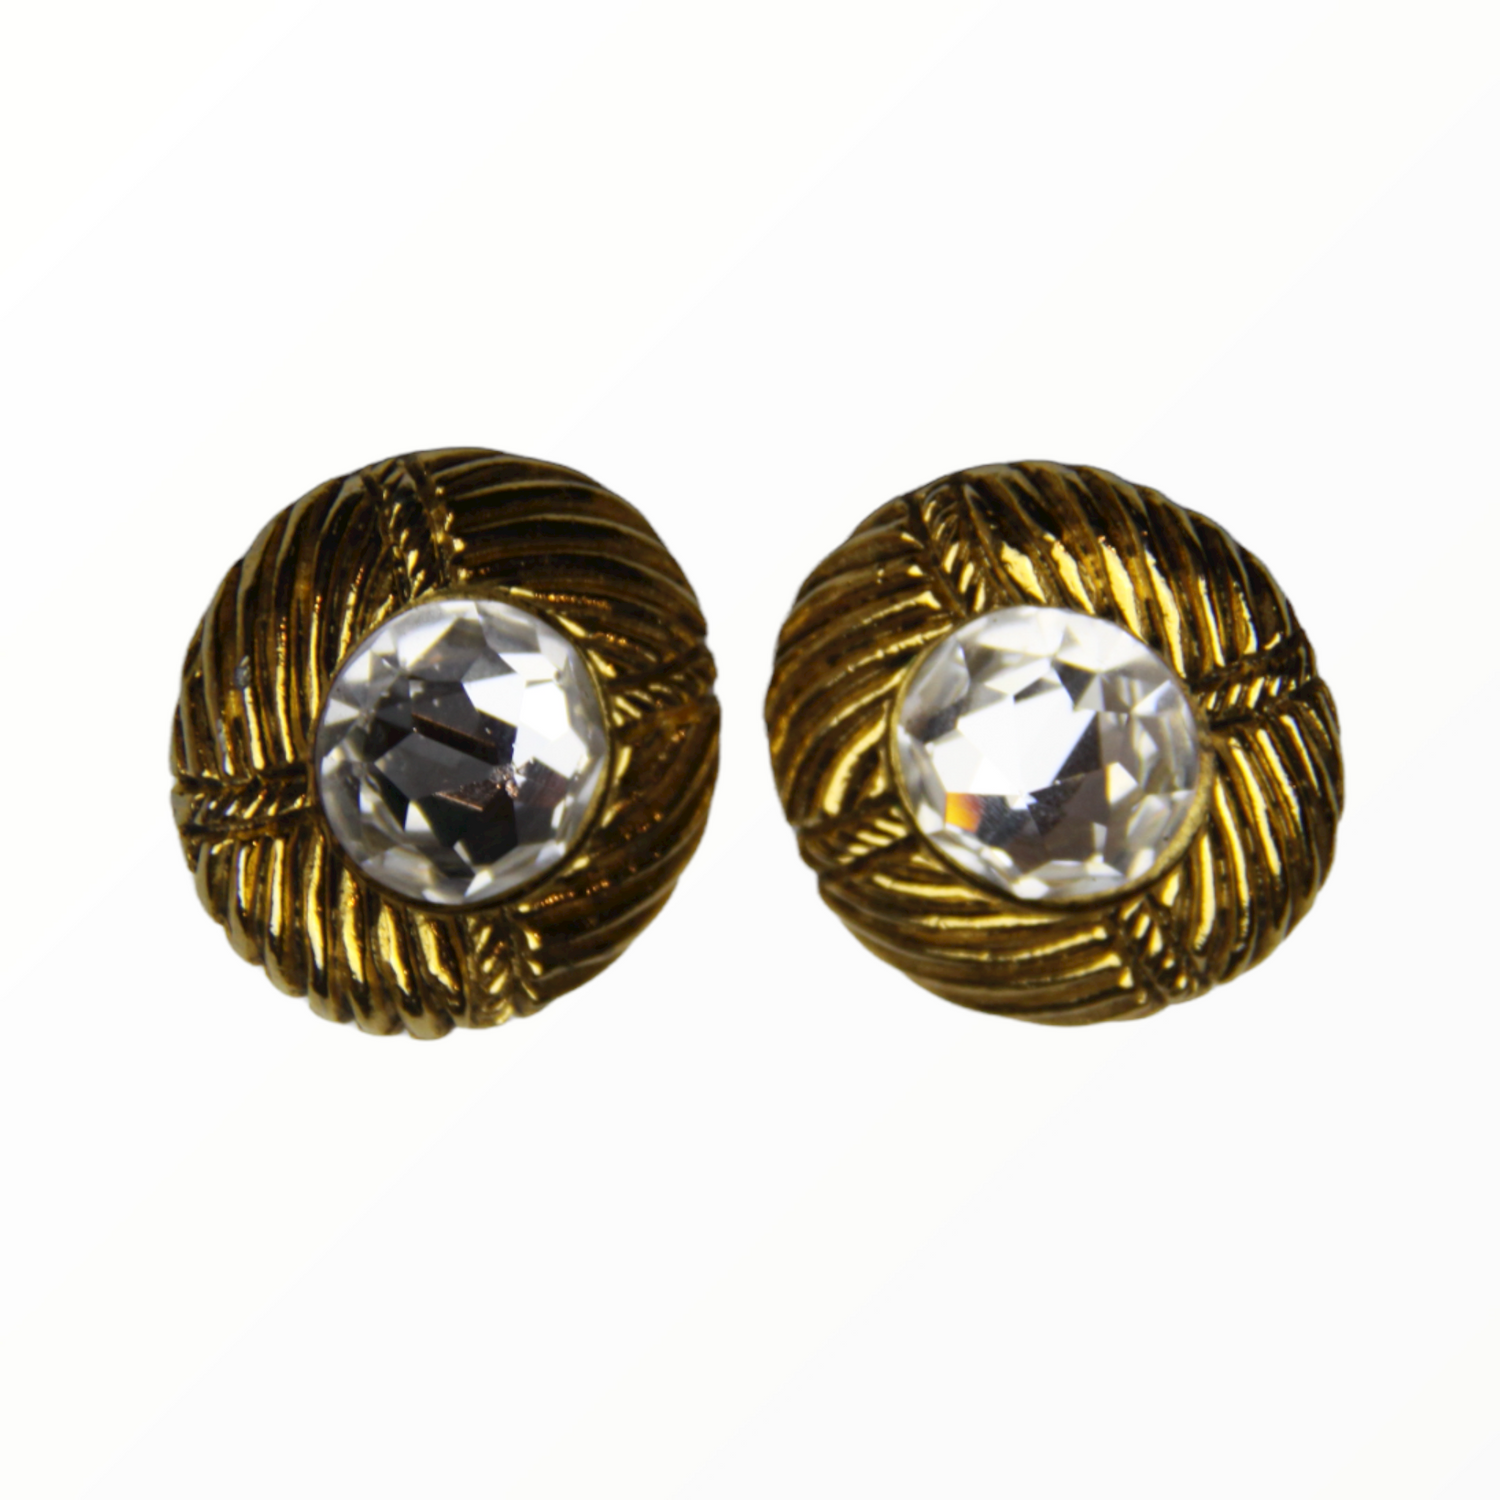 Chanel vintage diamond ear clips - 1980s second hand Lysis